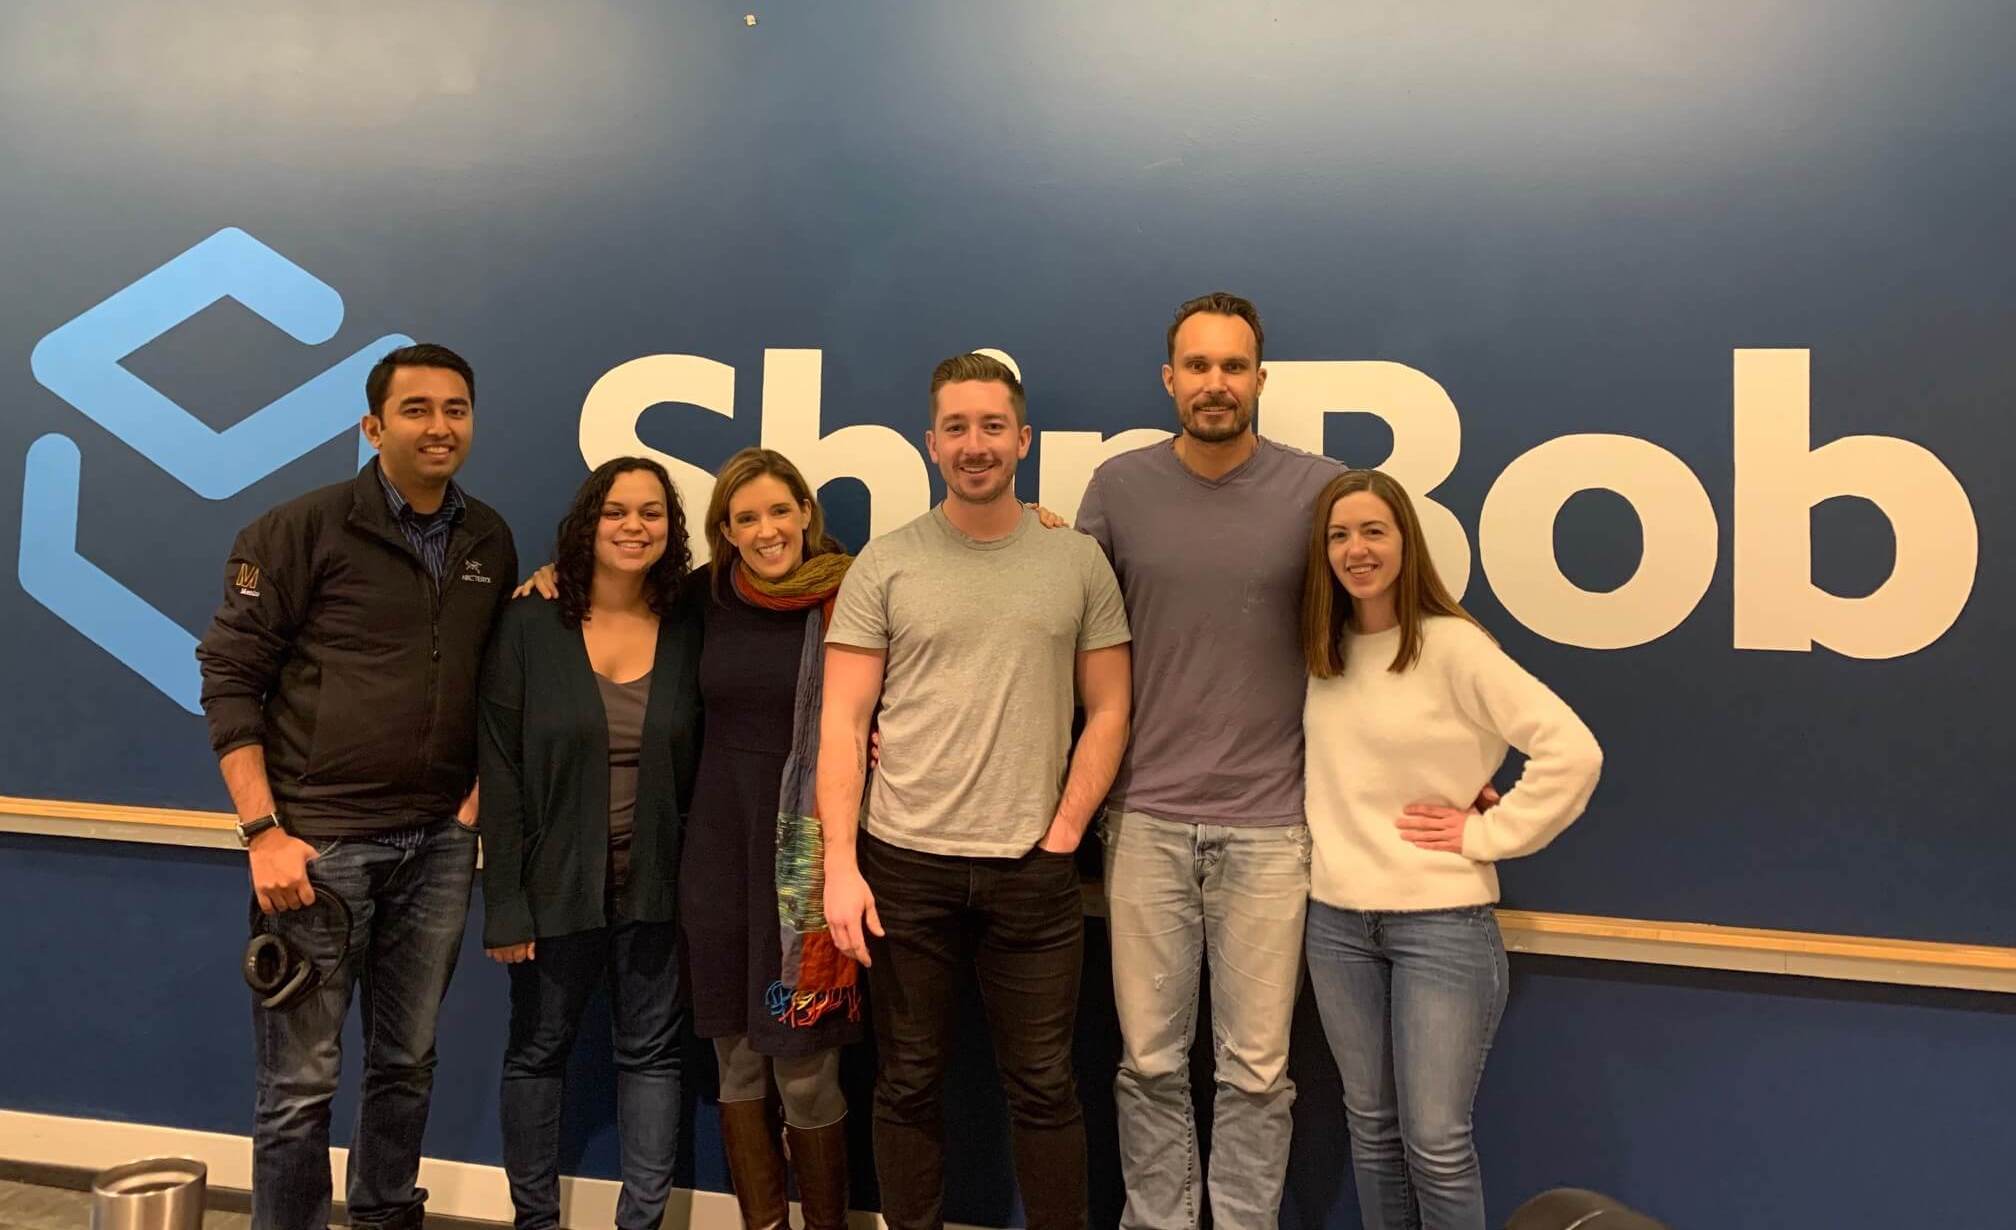 shipbob partnership with givenkind